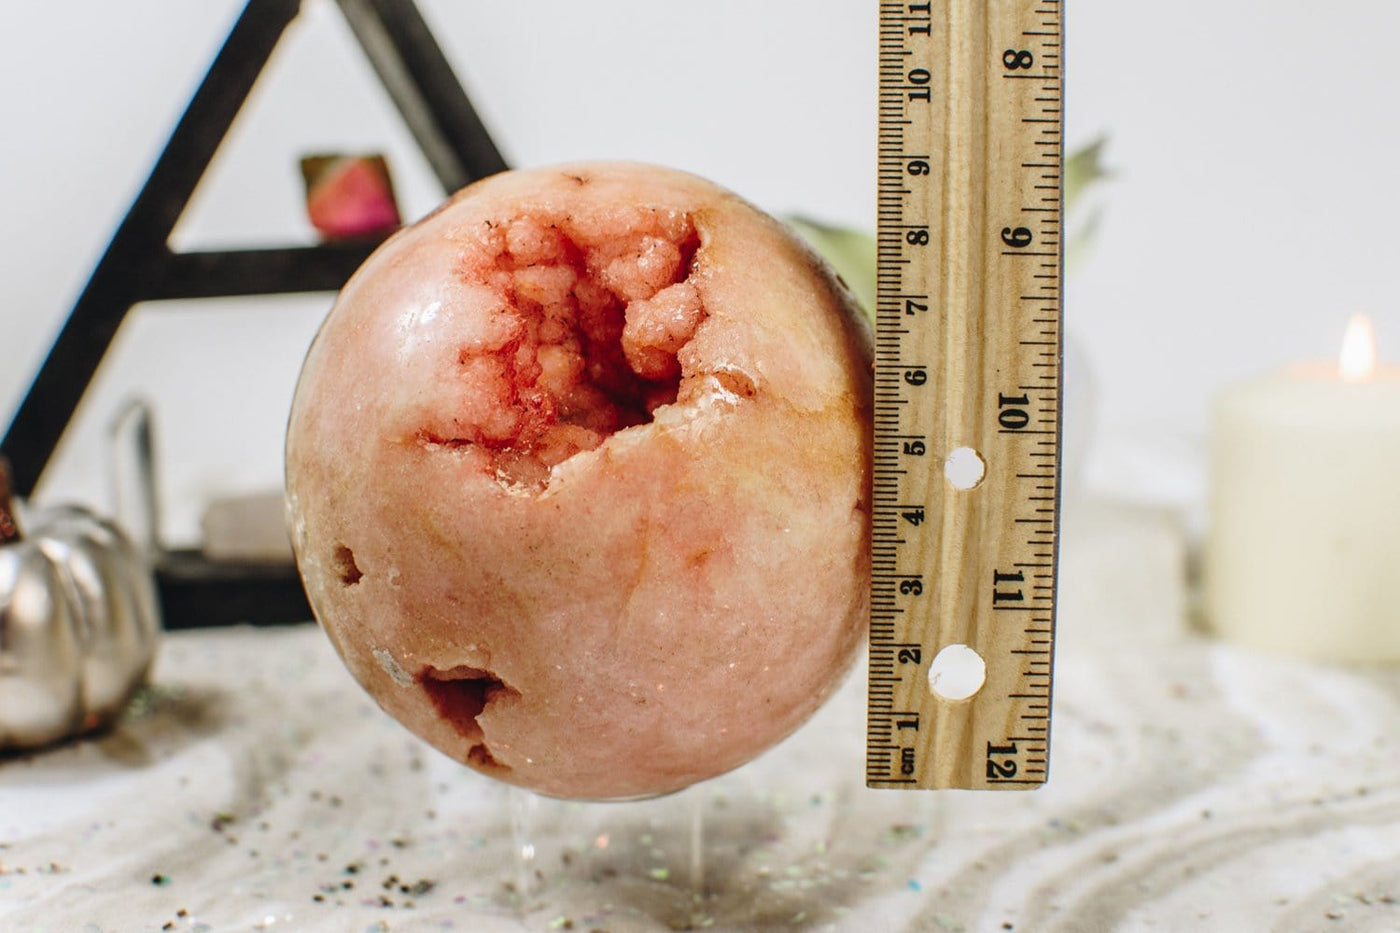 Pink Amethyst Sphere next to a ruler for size reference